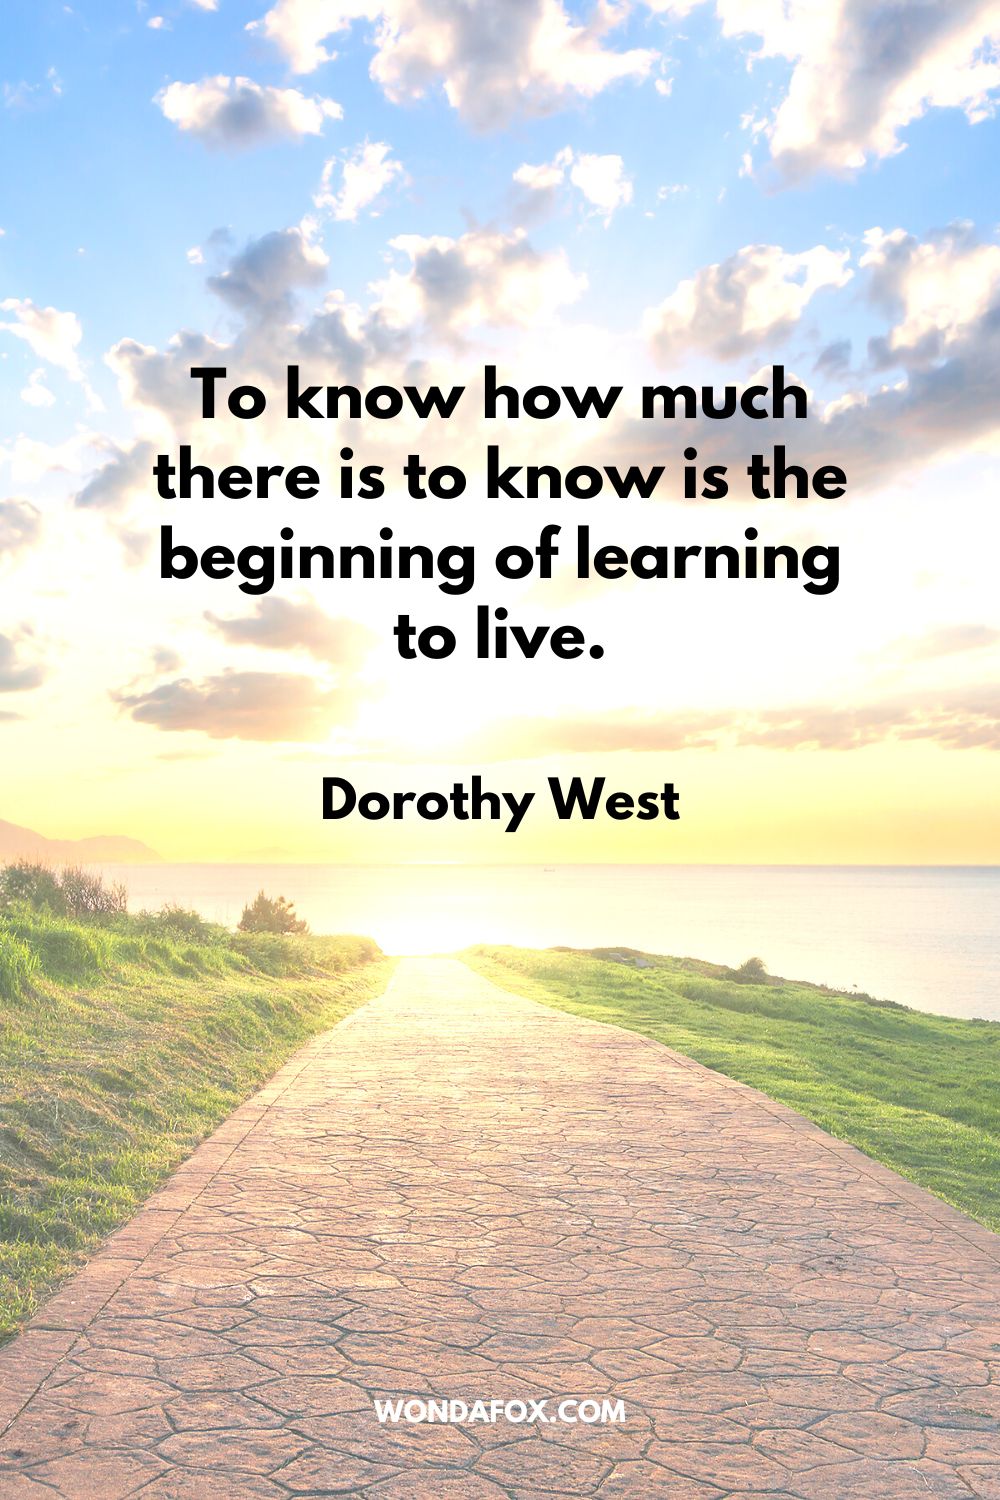 To know how much there is to know is the beginning of learning to live. Dorothy West